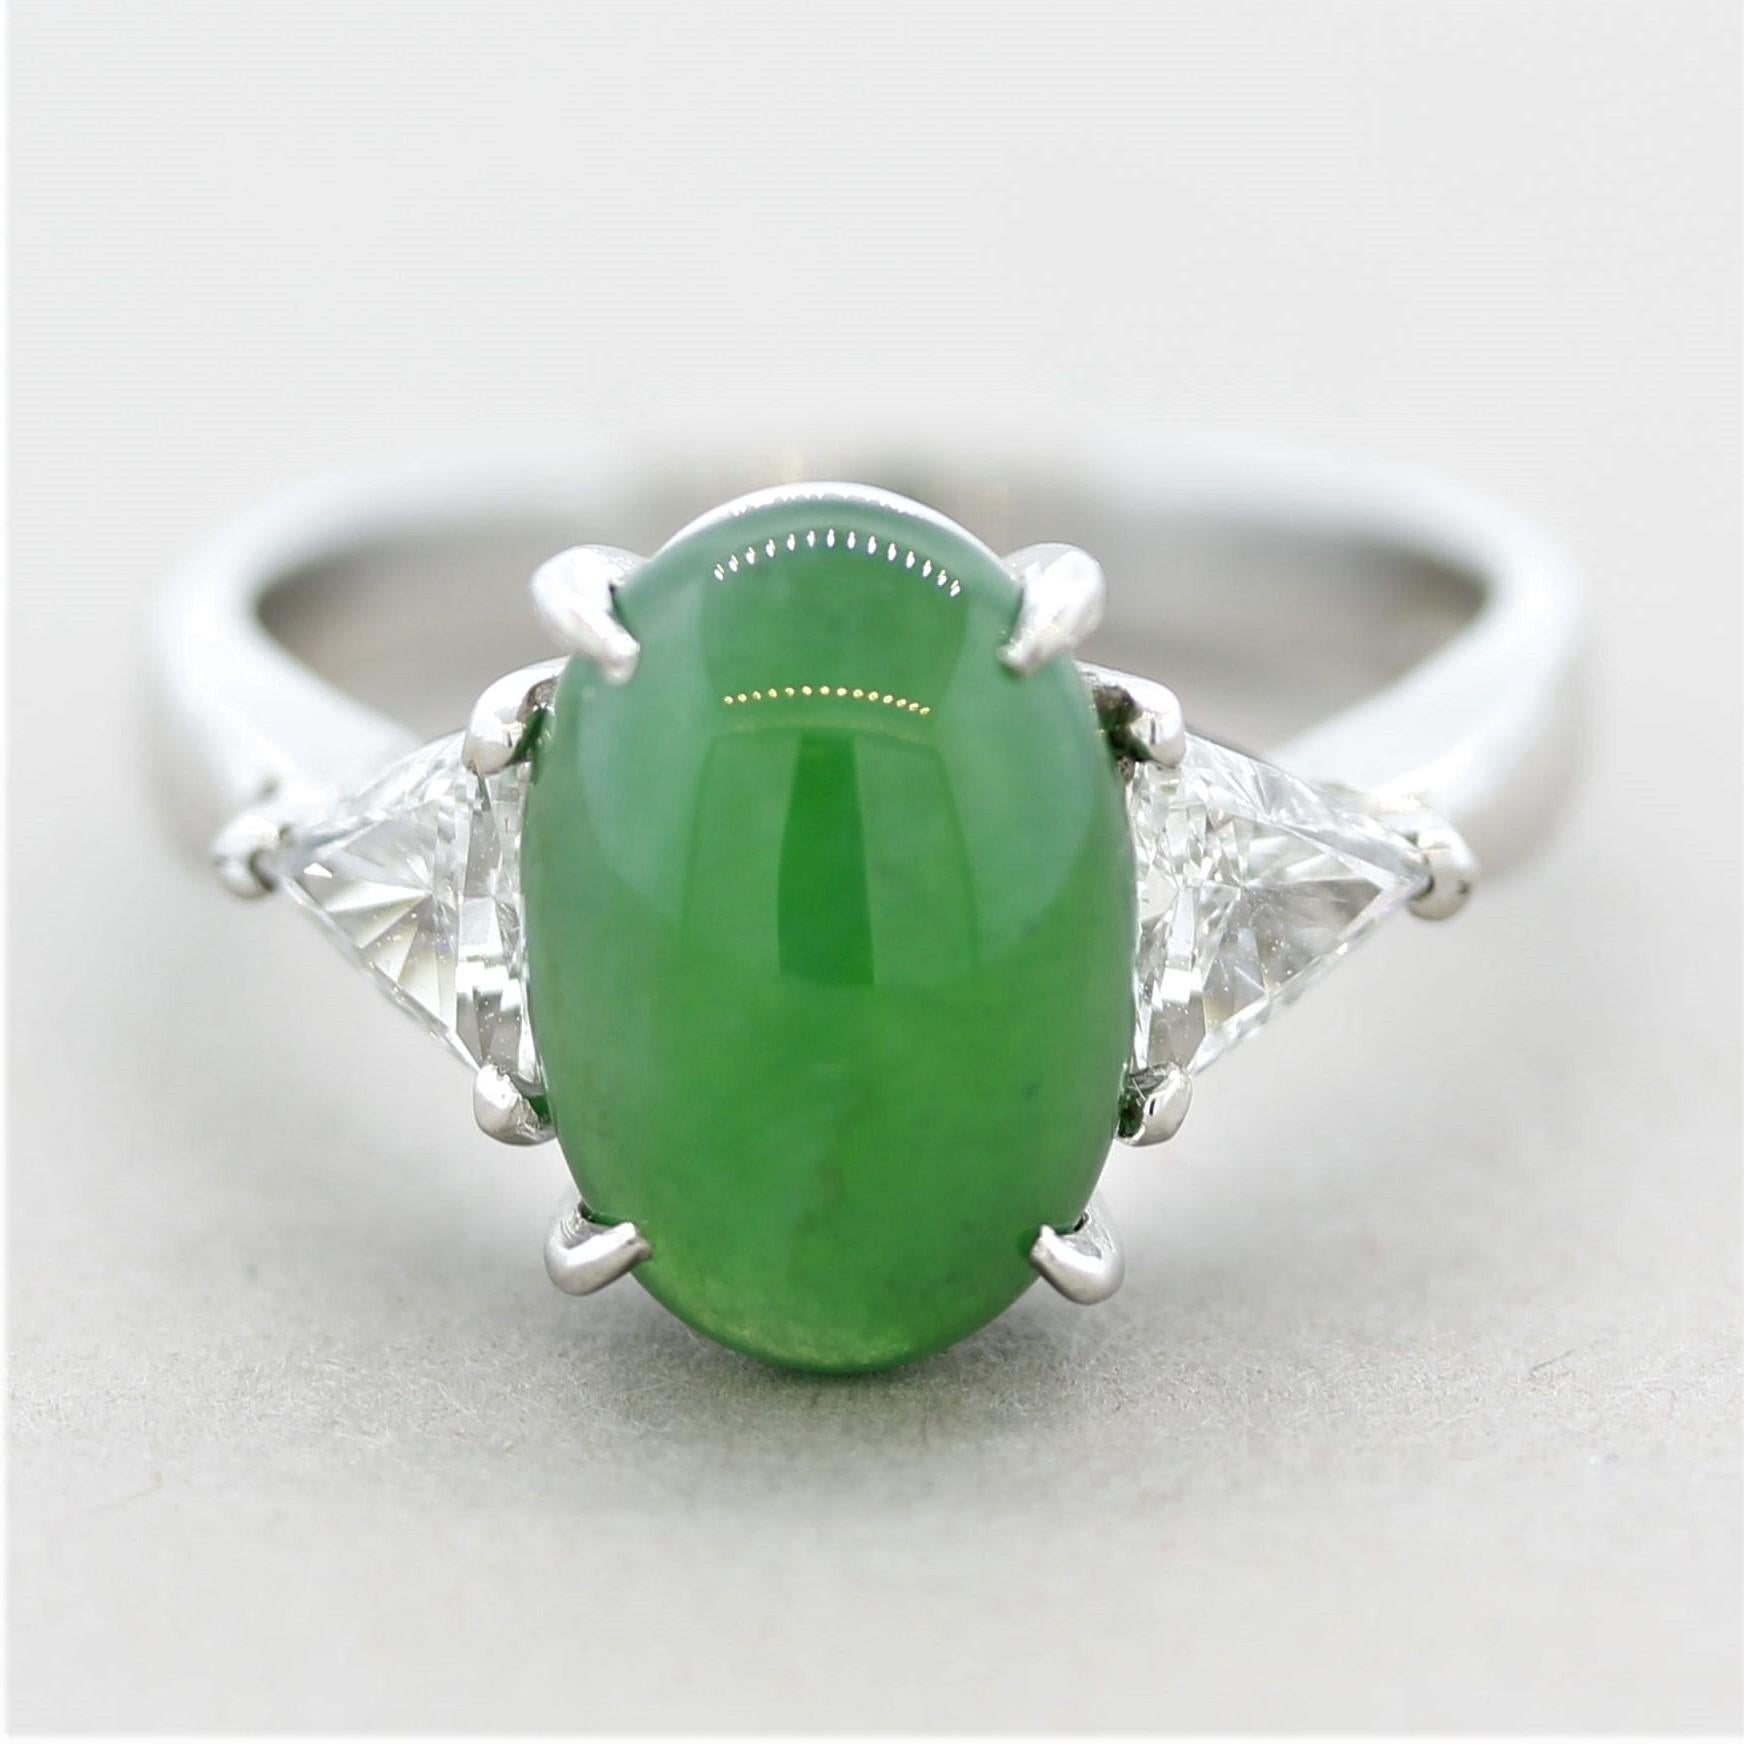 A classic 3-stone ring featuring a 3.65 carat natural jadeite jade! It has bright green color with excellent luster and translucency. It is accented by two triangular-shaped diamonds set on its sides and weigh a total of 0.52 carats. Hand-fabricated